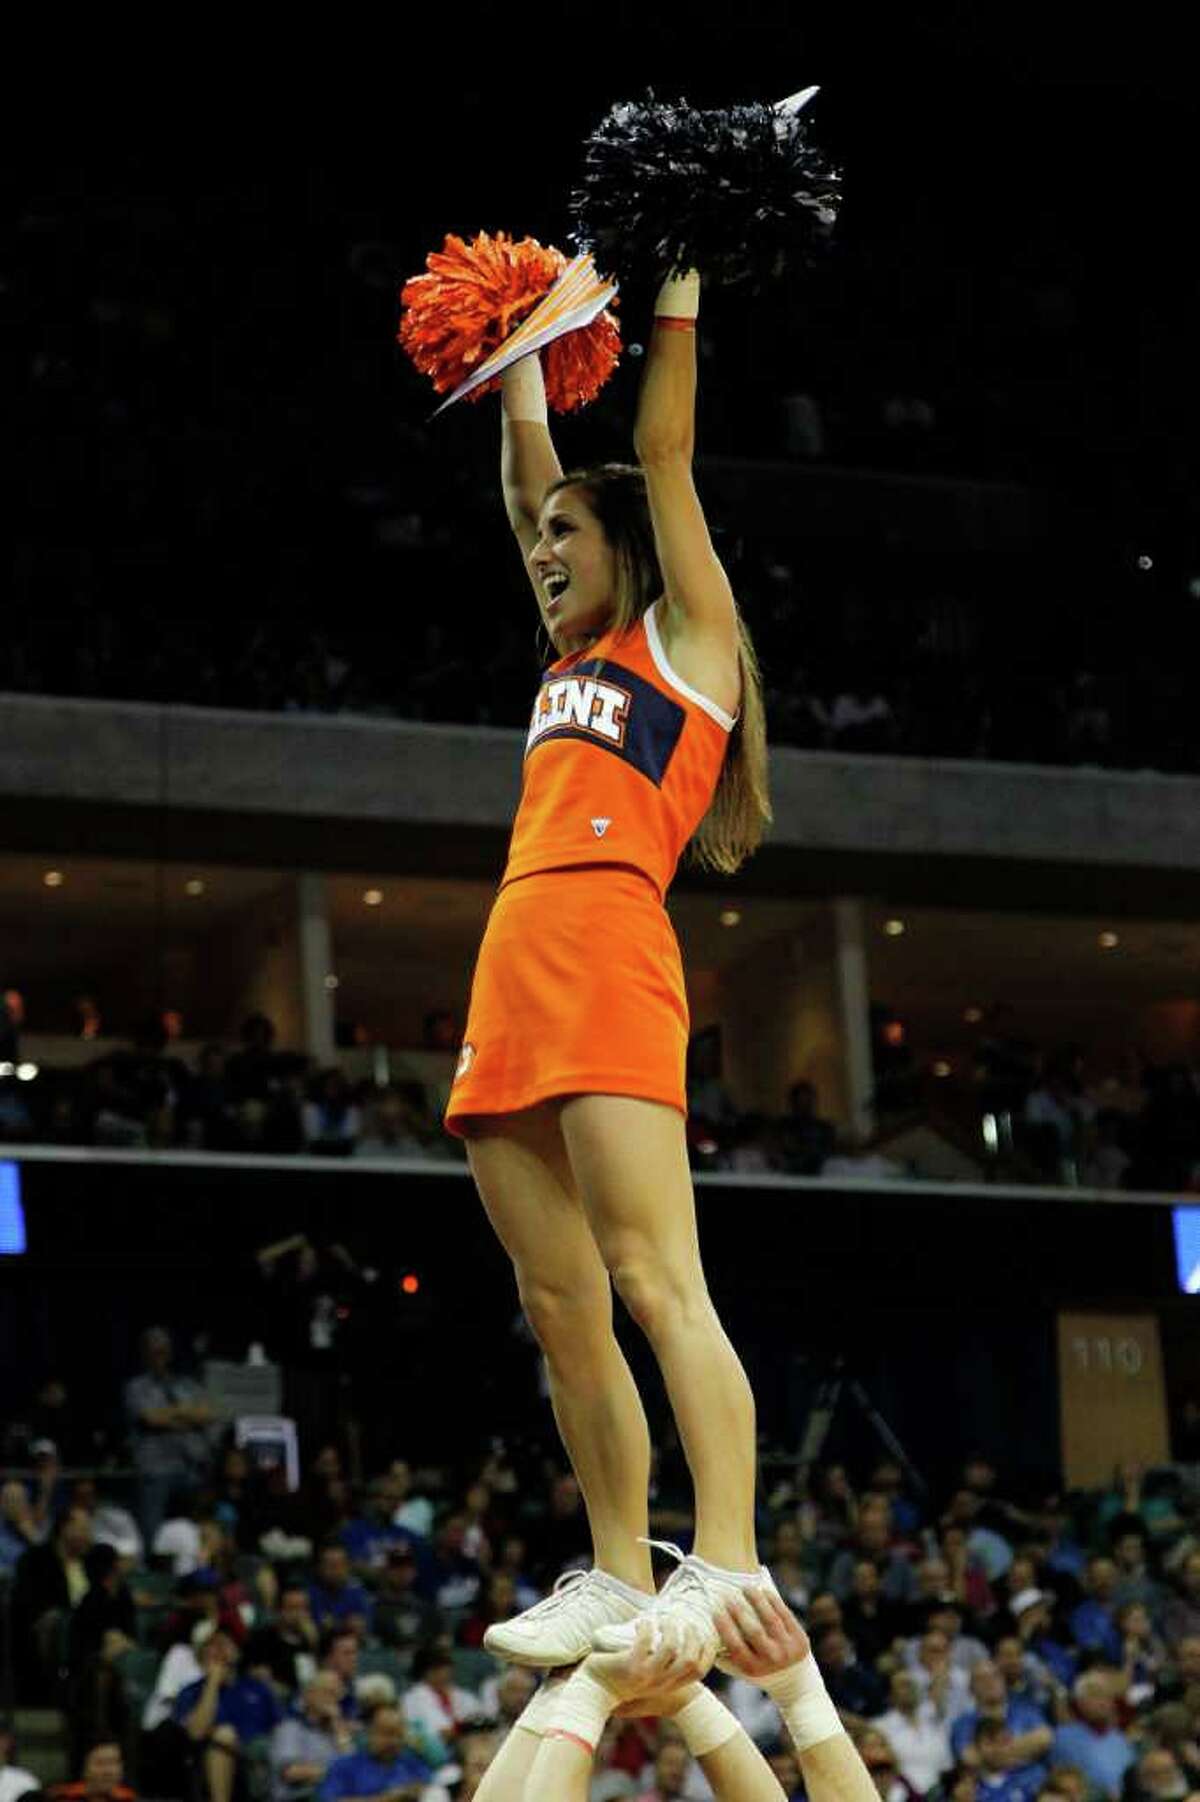 TULSA, OK - MARCH 20: Cheerleaders for the Illinois Fighting Illini perform during the third round game against the Kansas Jayhawks in the 2011 NCAA men's basketball tournament at BOK Center on March 20, 2011 in Tulsa, Oklahoma. (Photo by Tom Pennington/Getty Images)